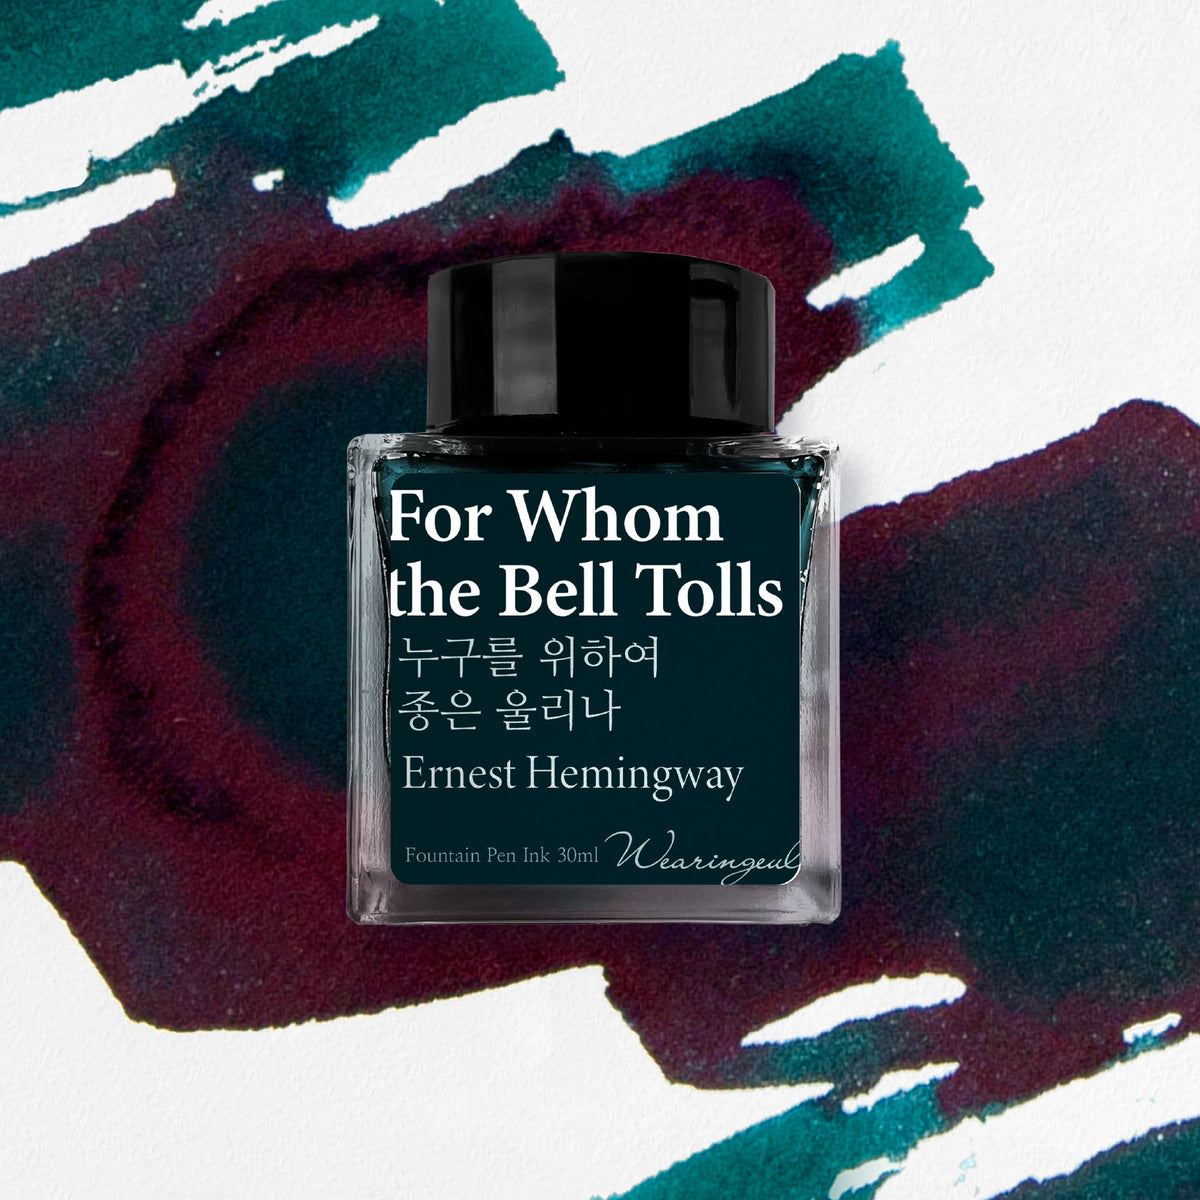 Wearingeul - Fountain Pen Ink - For Whom the Bell Tolls